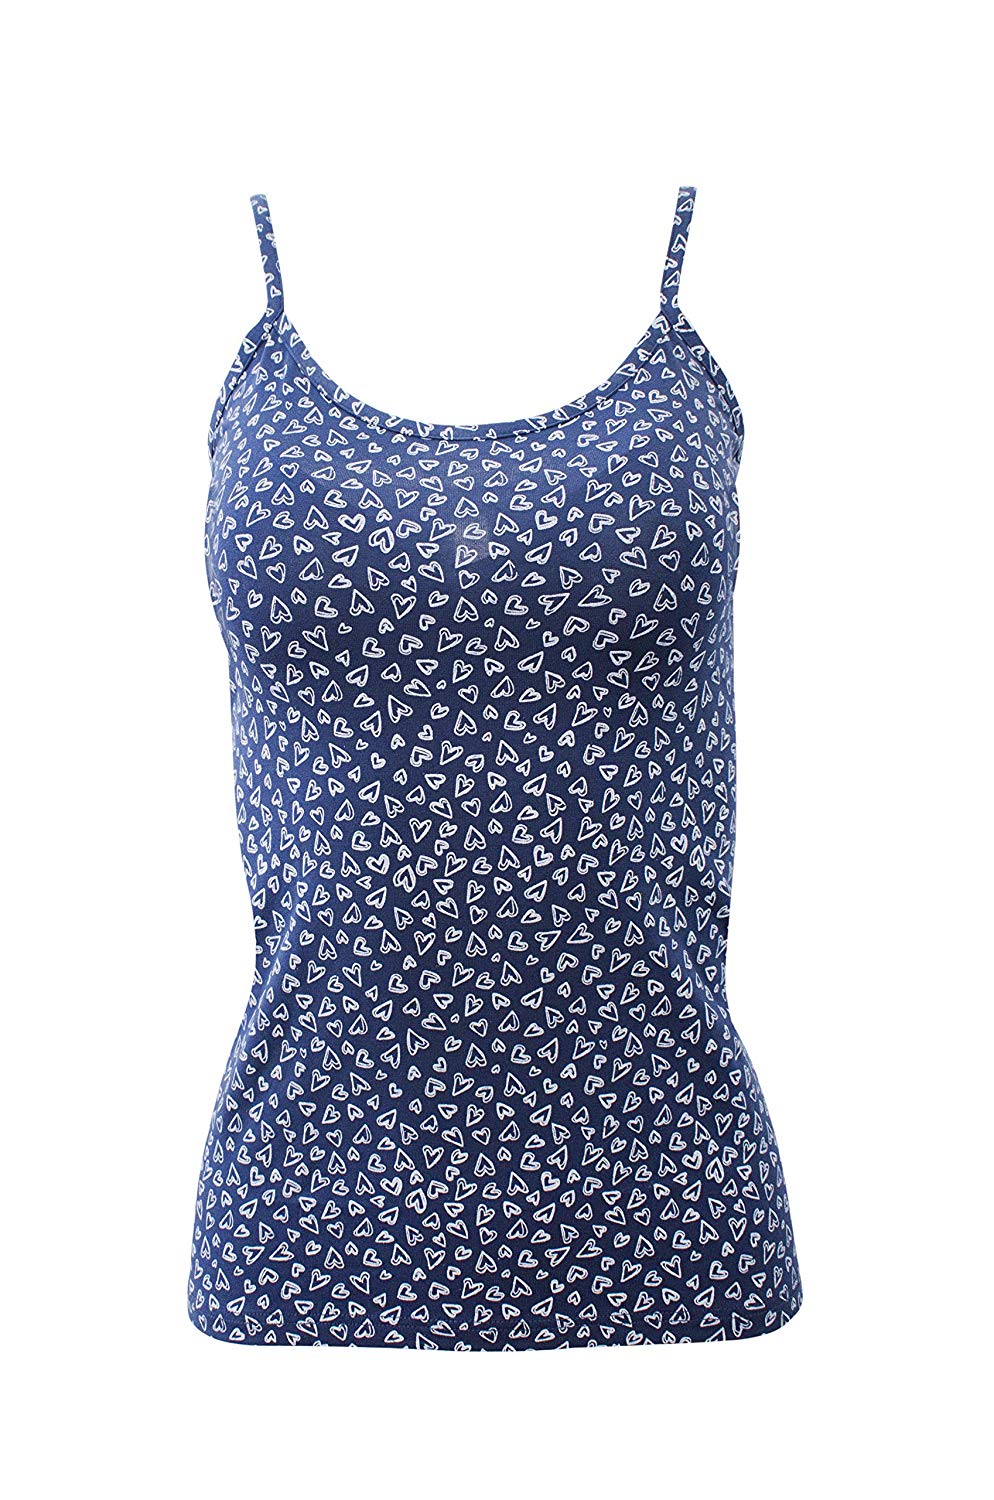 BASIC COTTON Free Spirit Premium Quality Cotton Women's Print Camisole. Proudly Made in Italy.